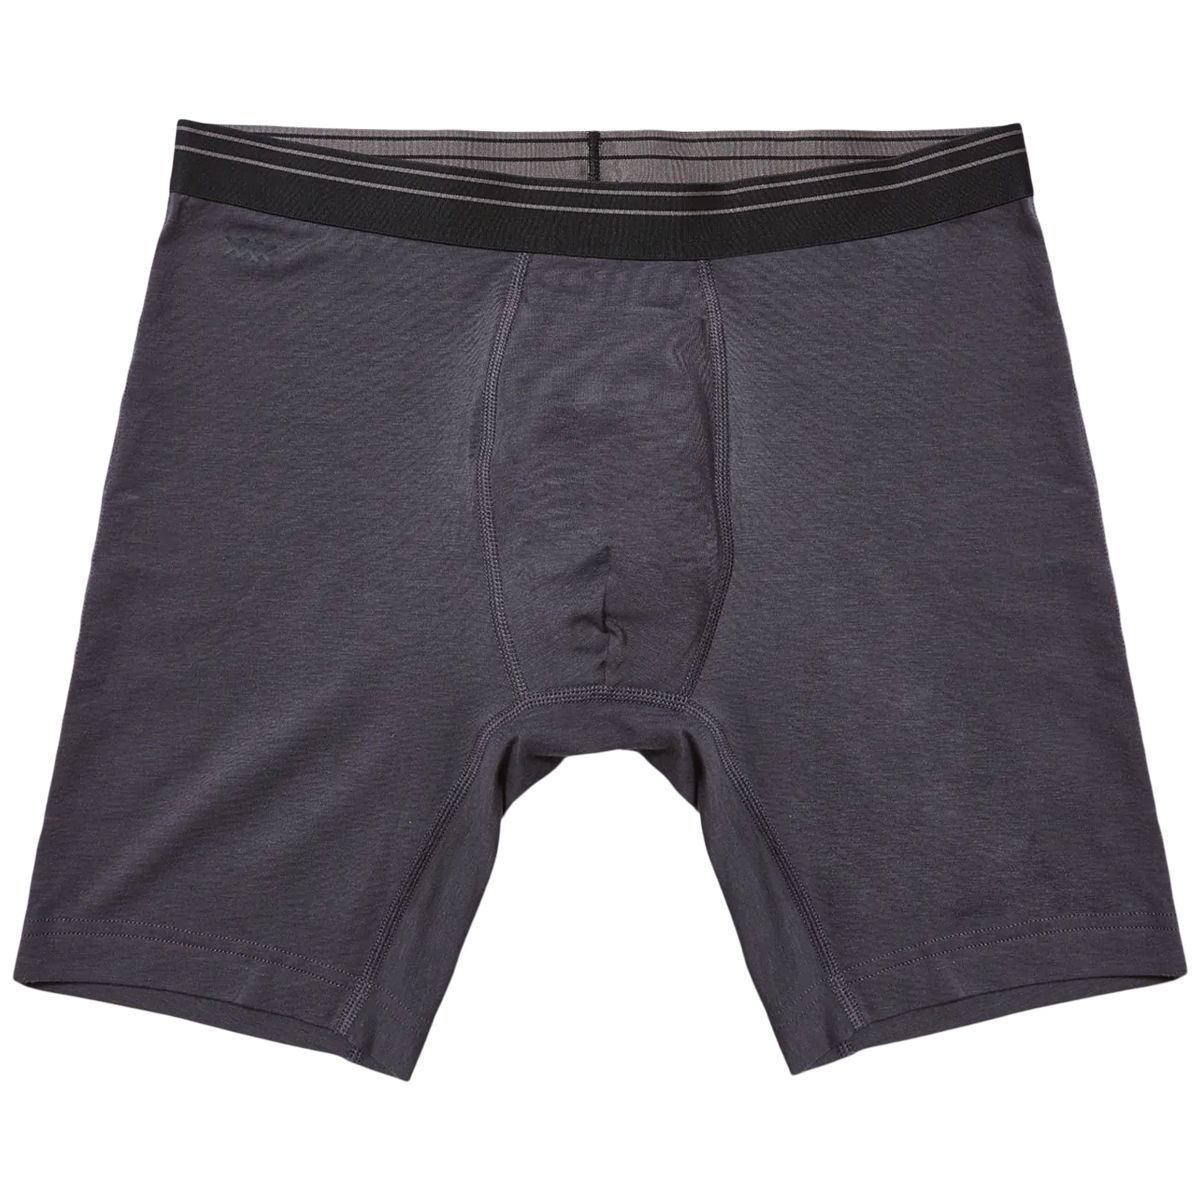 The 18 Best Boxer Briefs For Men In 2023 8390